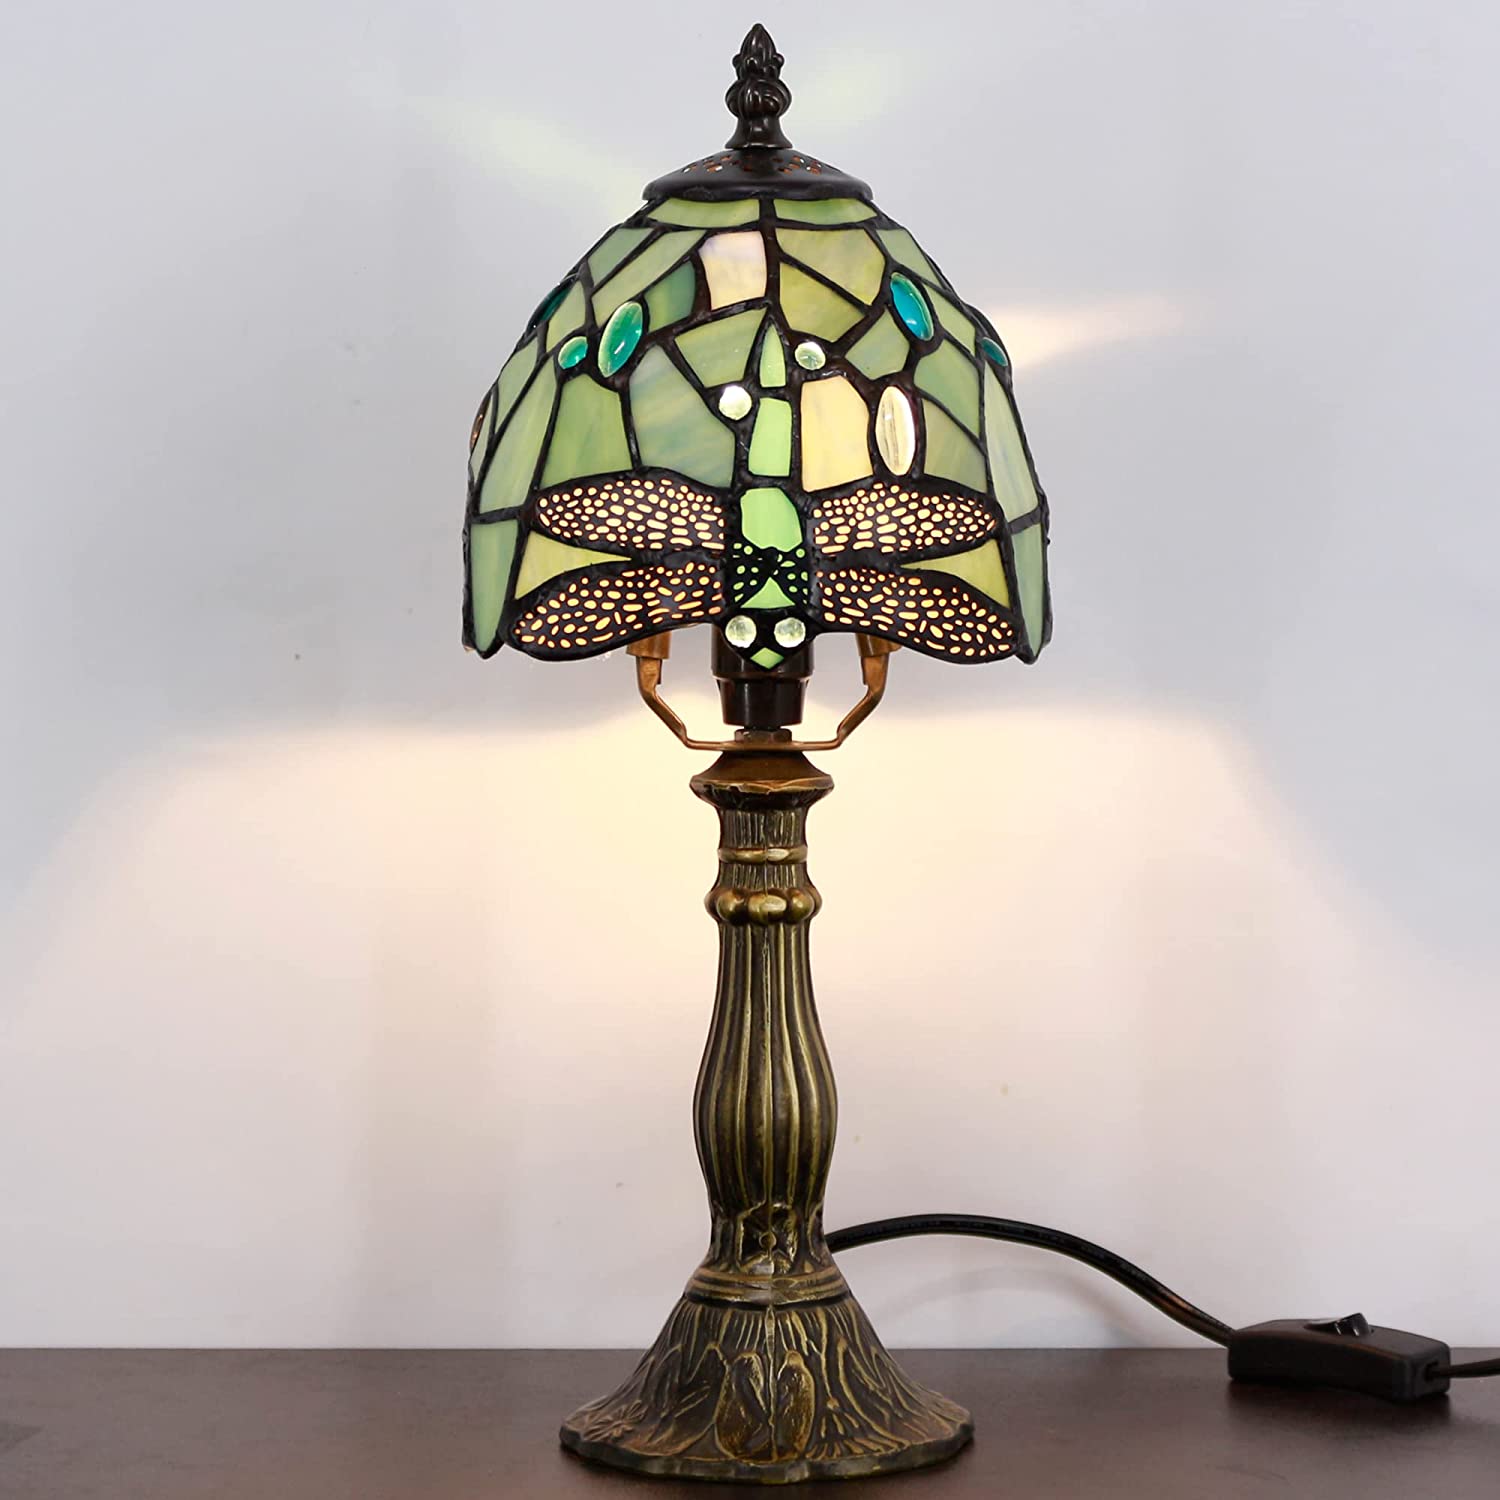 Werfactory® Small Tiffany Lamp Sea Blue Stained Glass Dragonfly Style Table Lamp 14" Tall